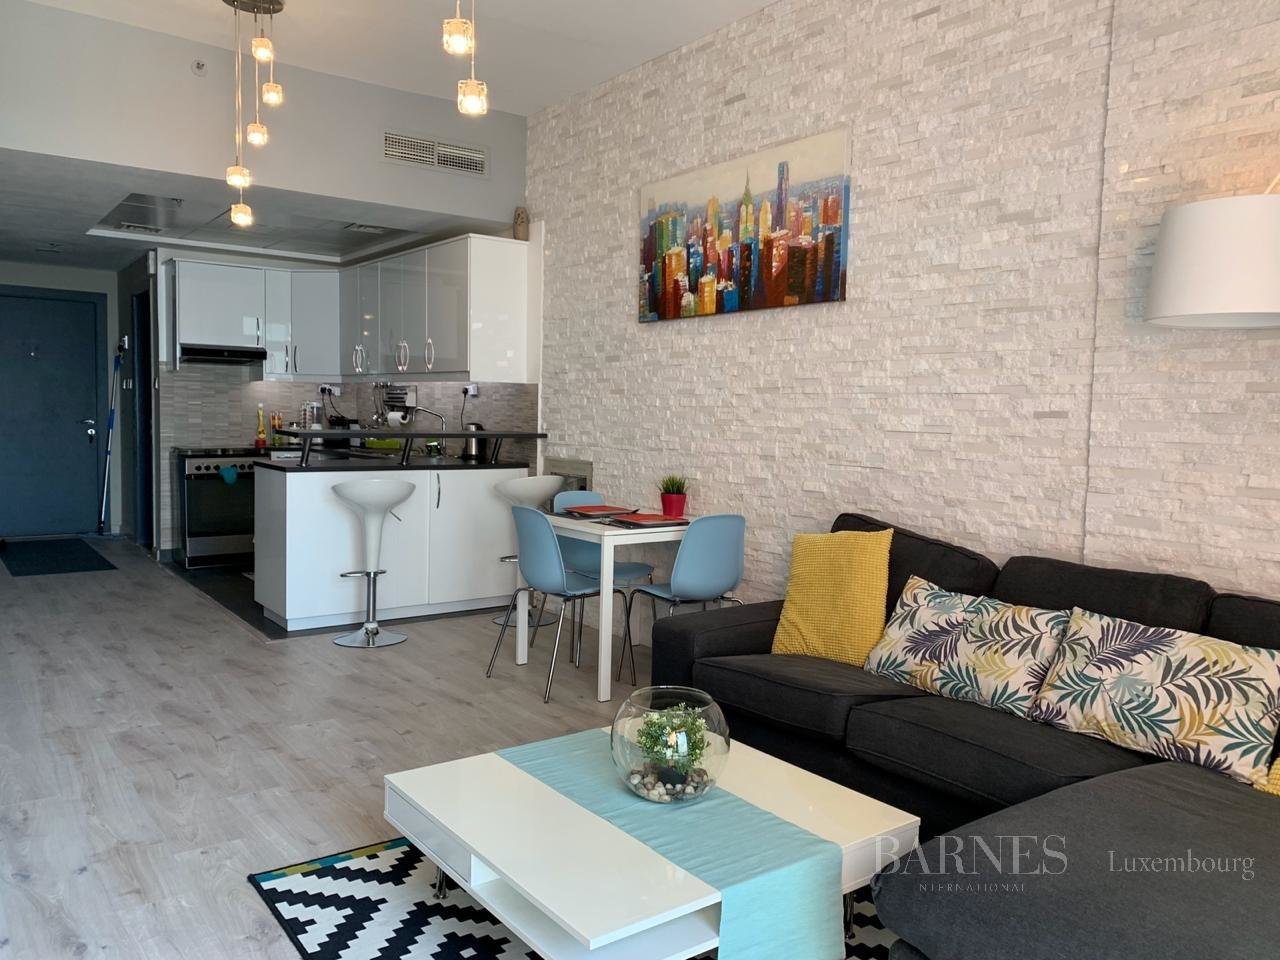 Apartment for sale 3 Bedrooms 1507 sq ft Dubai Silicon Oasis - € 320,250